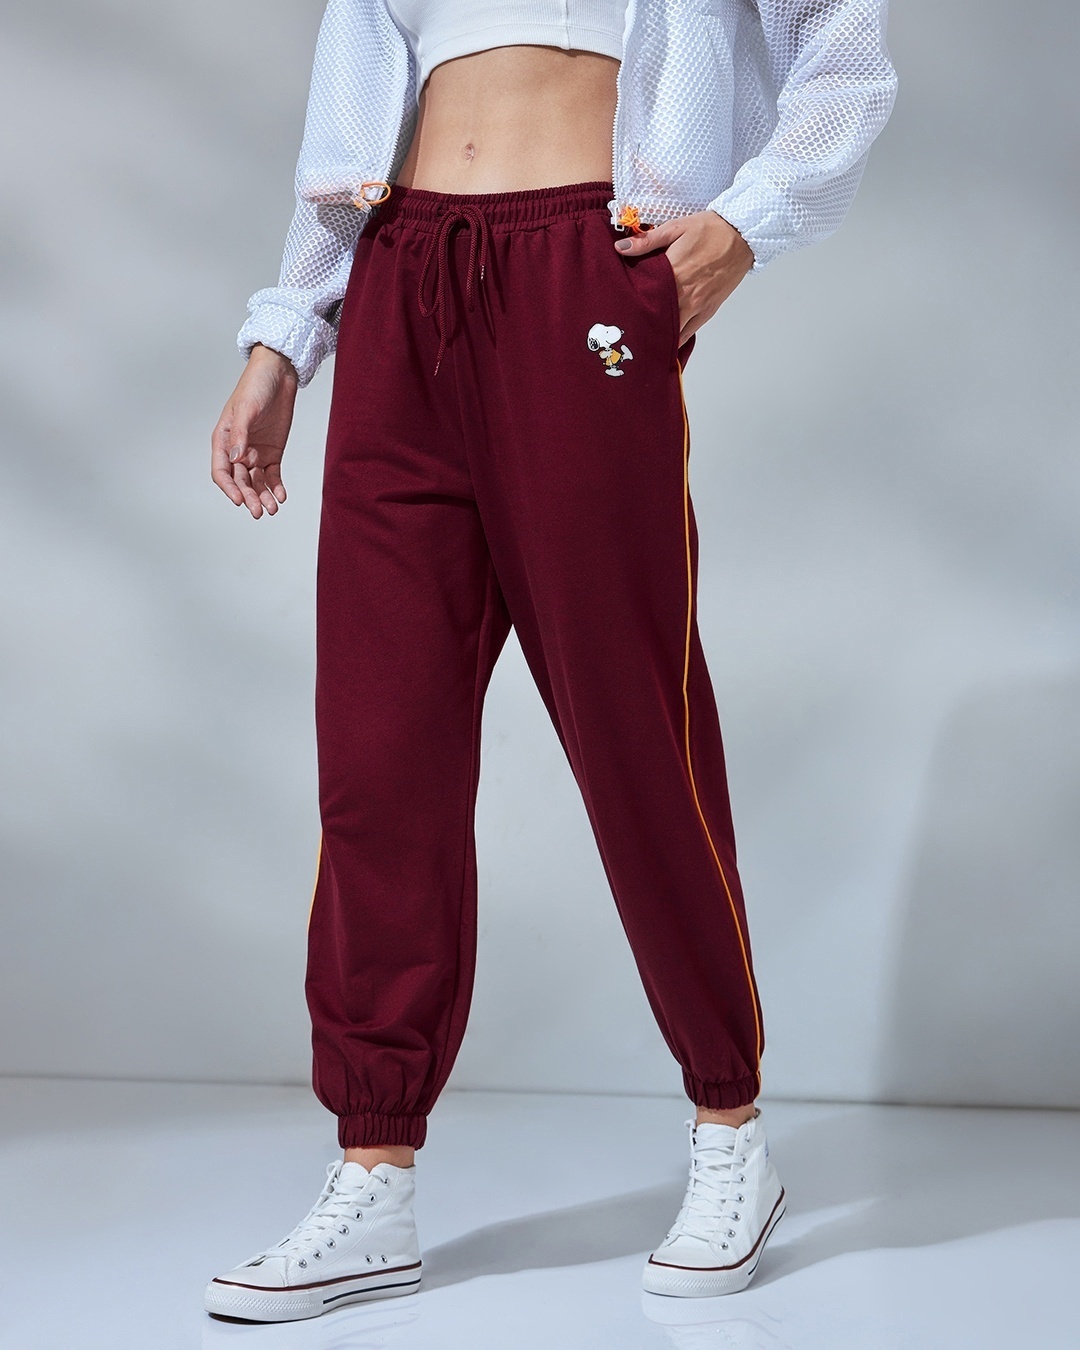 Buy Women's Maroon Peanuts Pie Graphic Printed Oversized Joggers